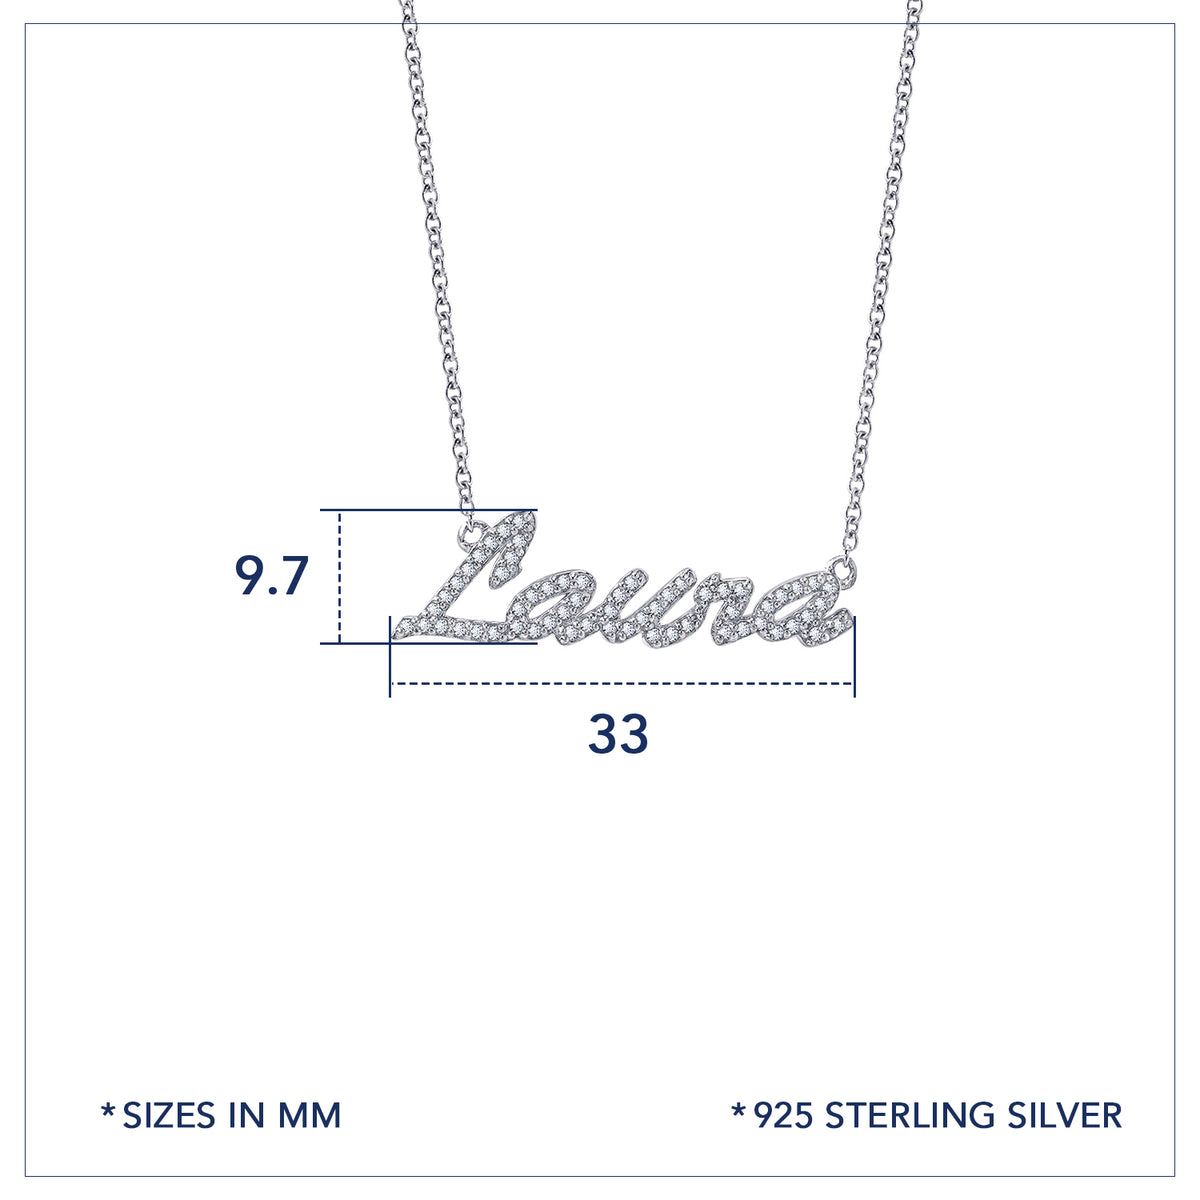 Pave Name Necklace